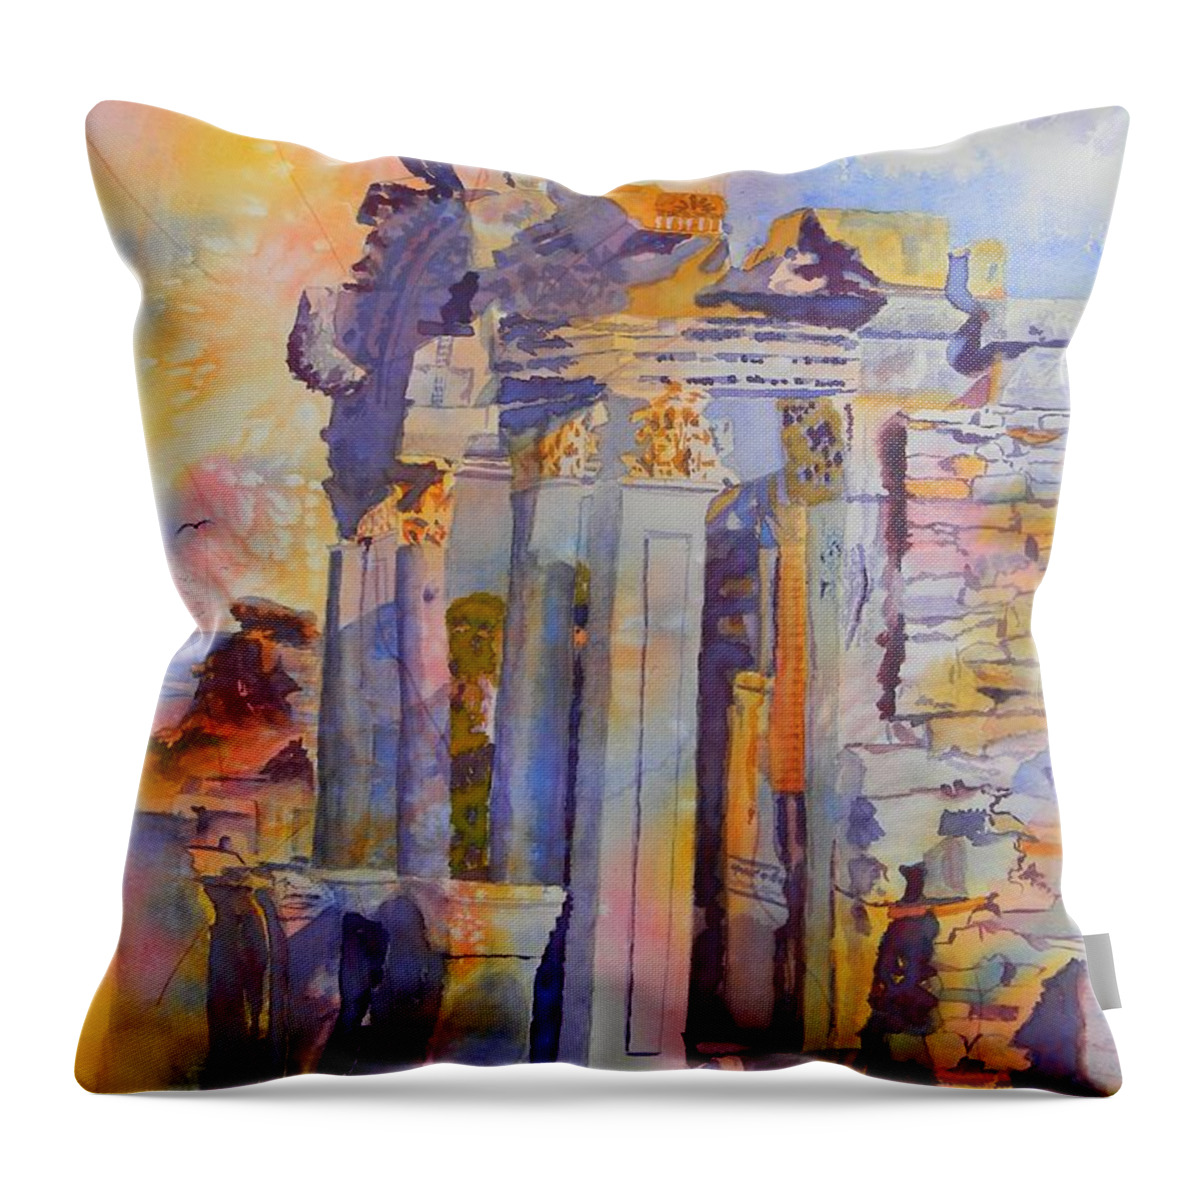 Ephesus Ruins Throw Pillow featuring the painting Ephesus Ruins by Warren Thompson